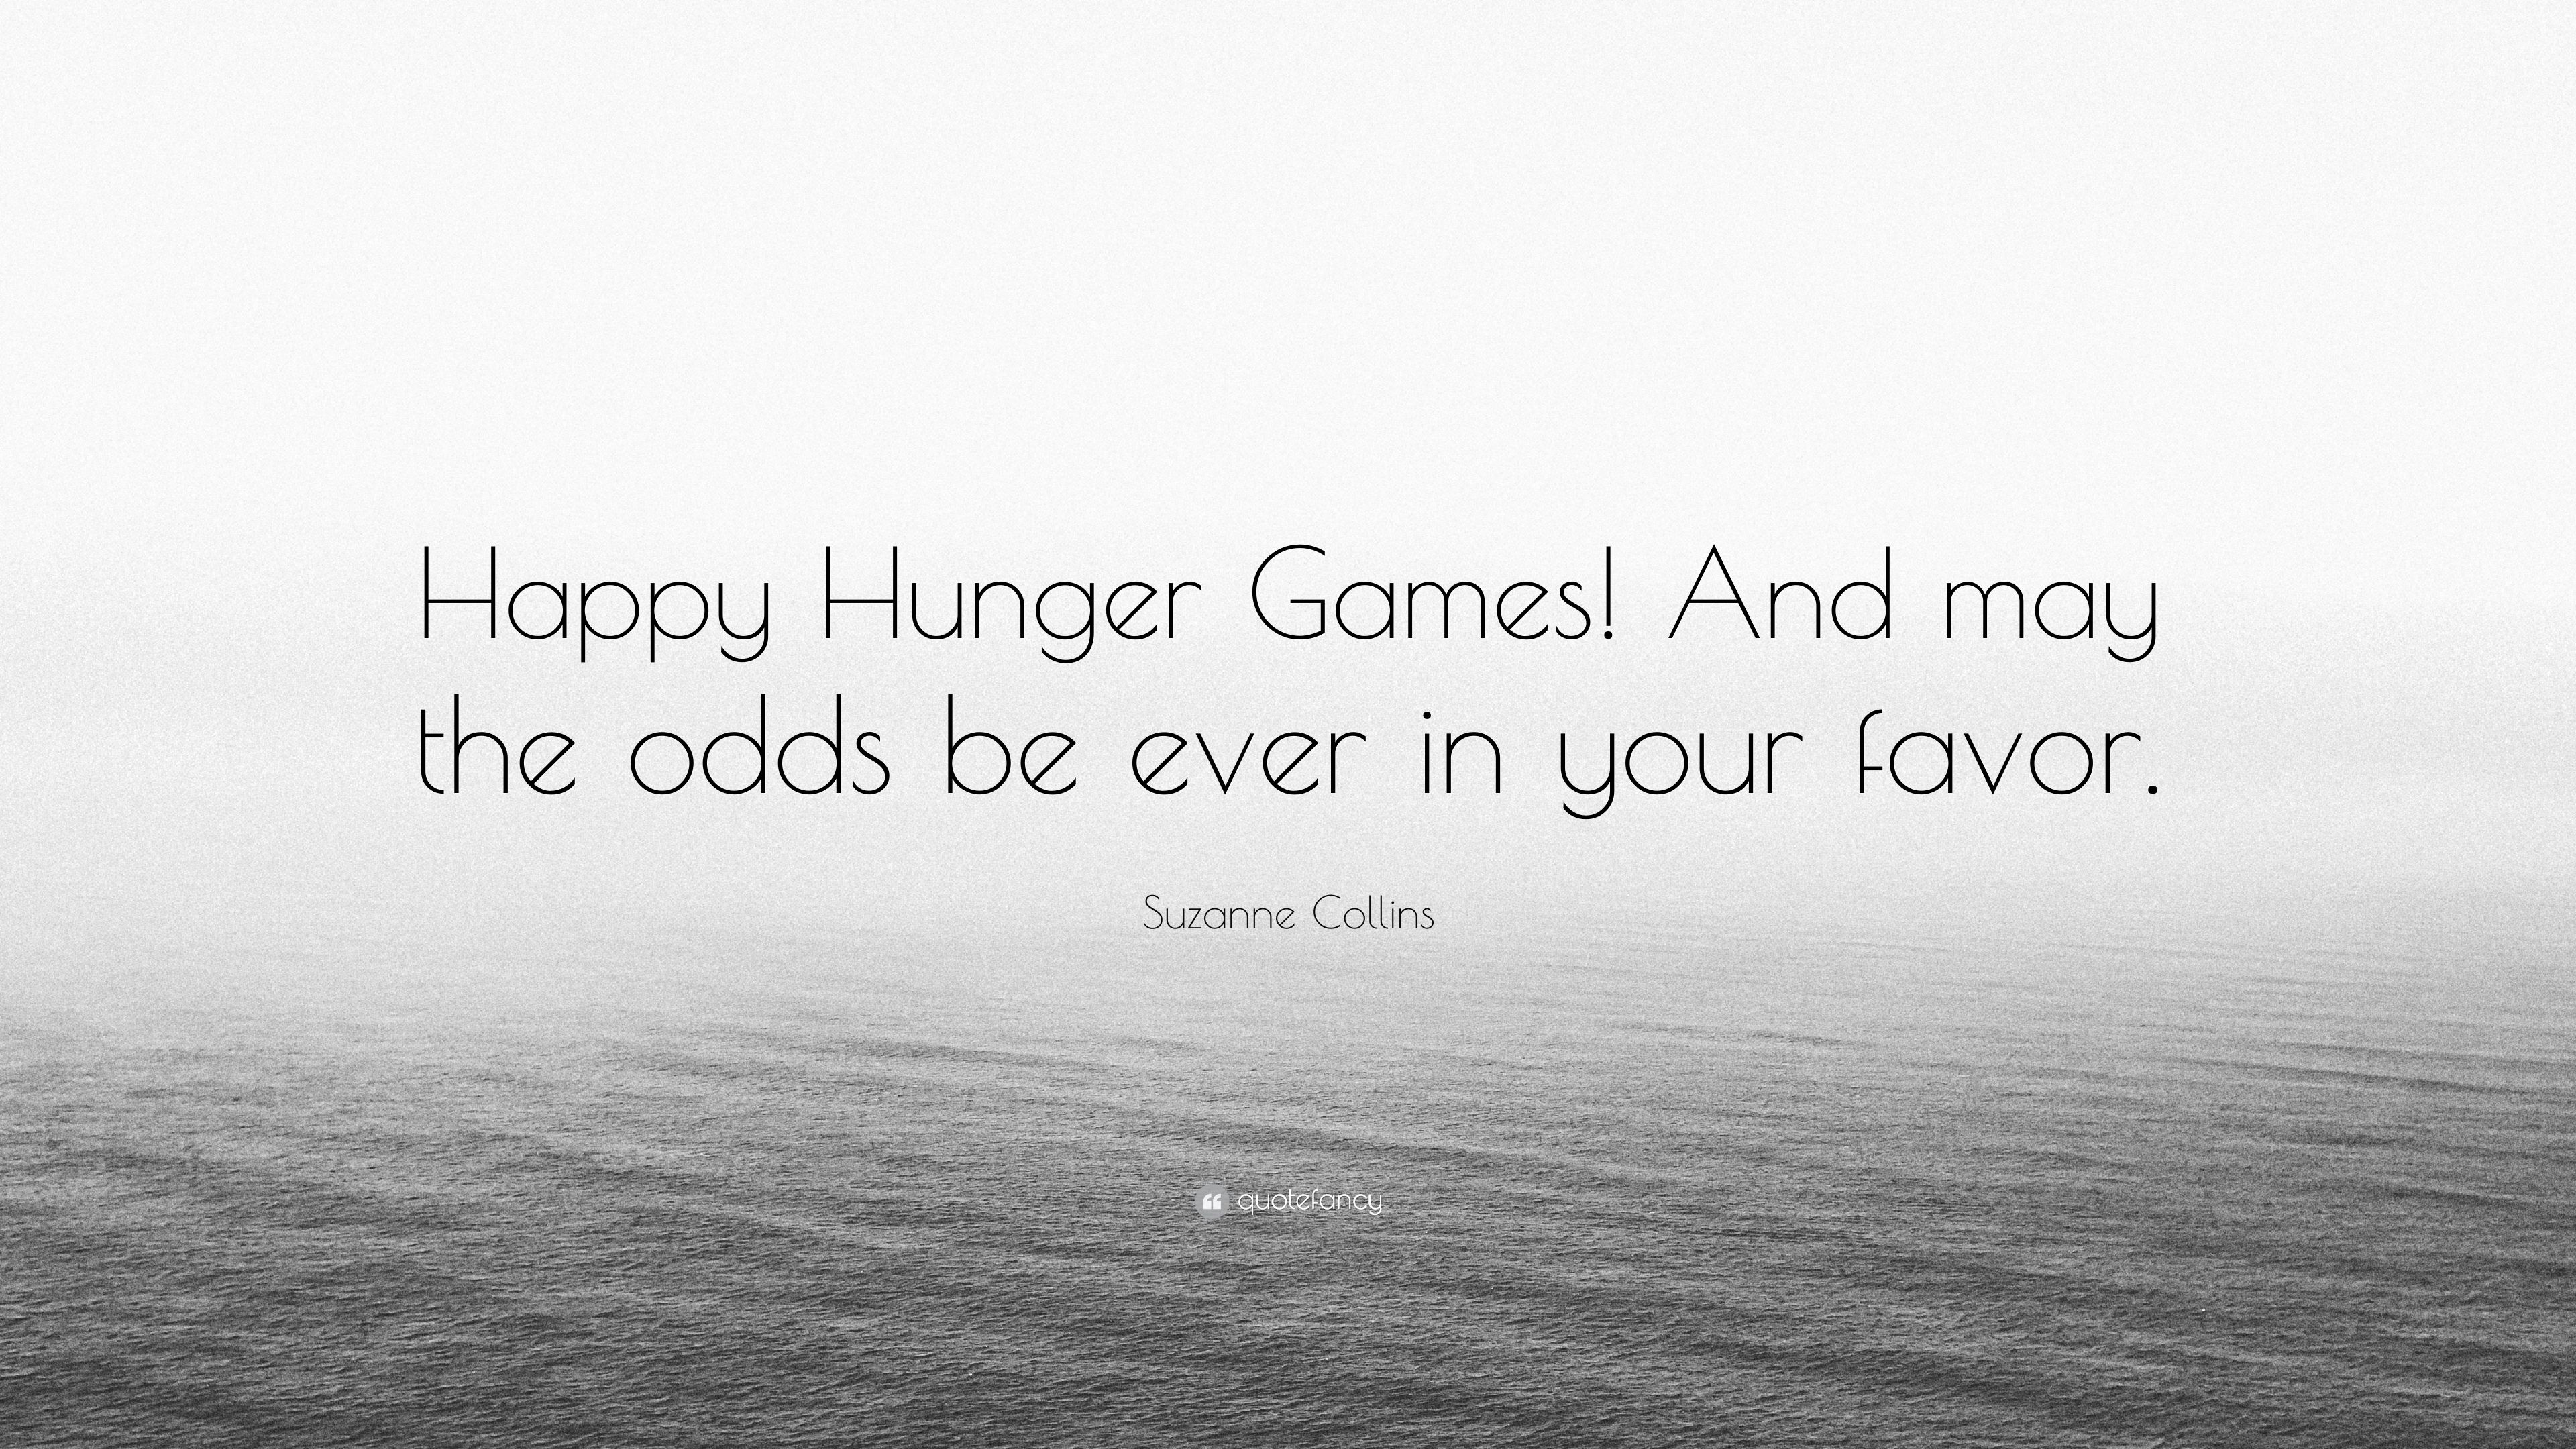 And may the odds be ever in your favor. 